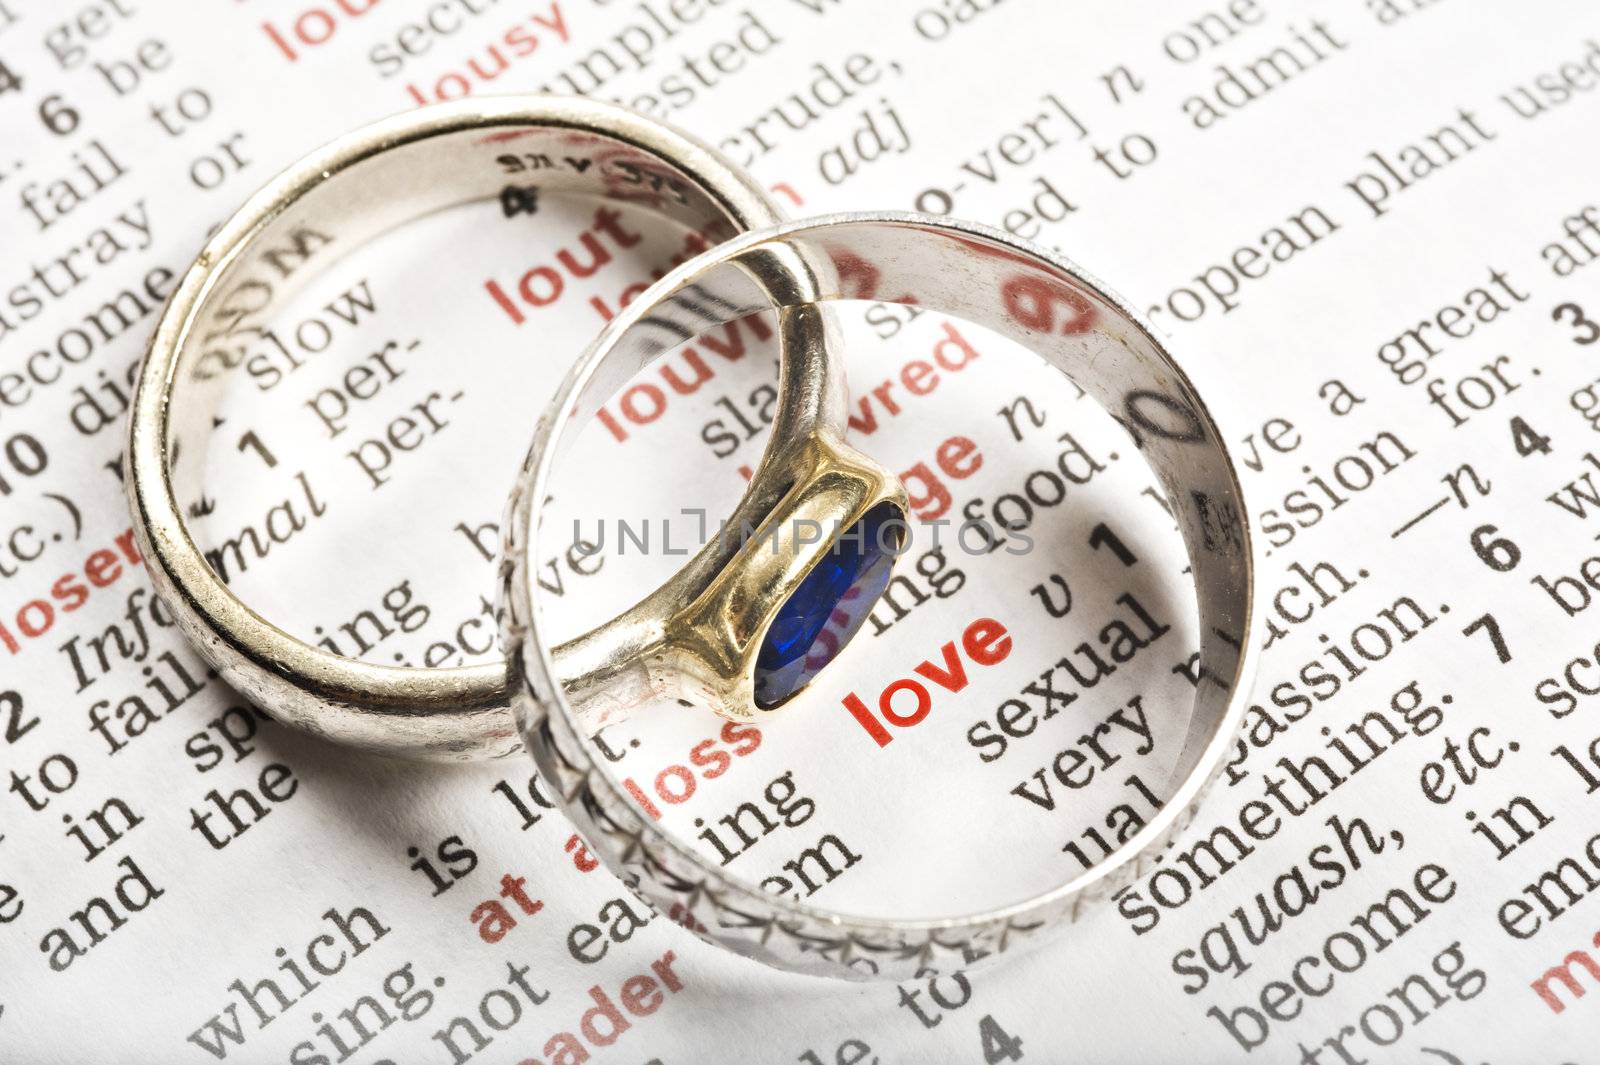 Wedding rings on a dictionary page showing love